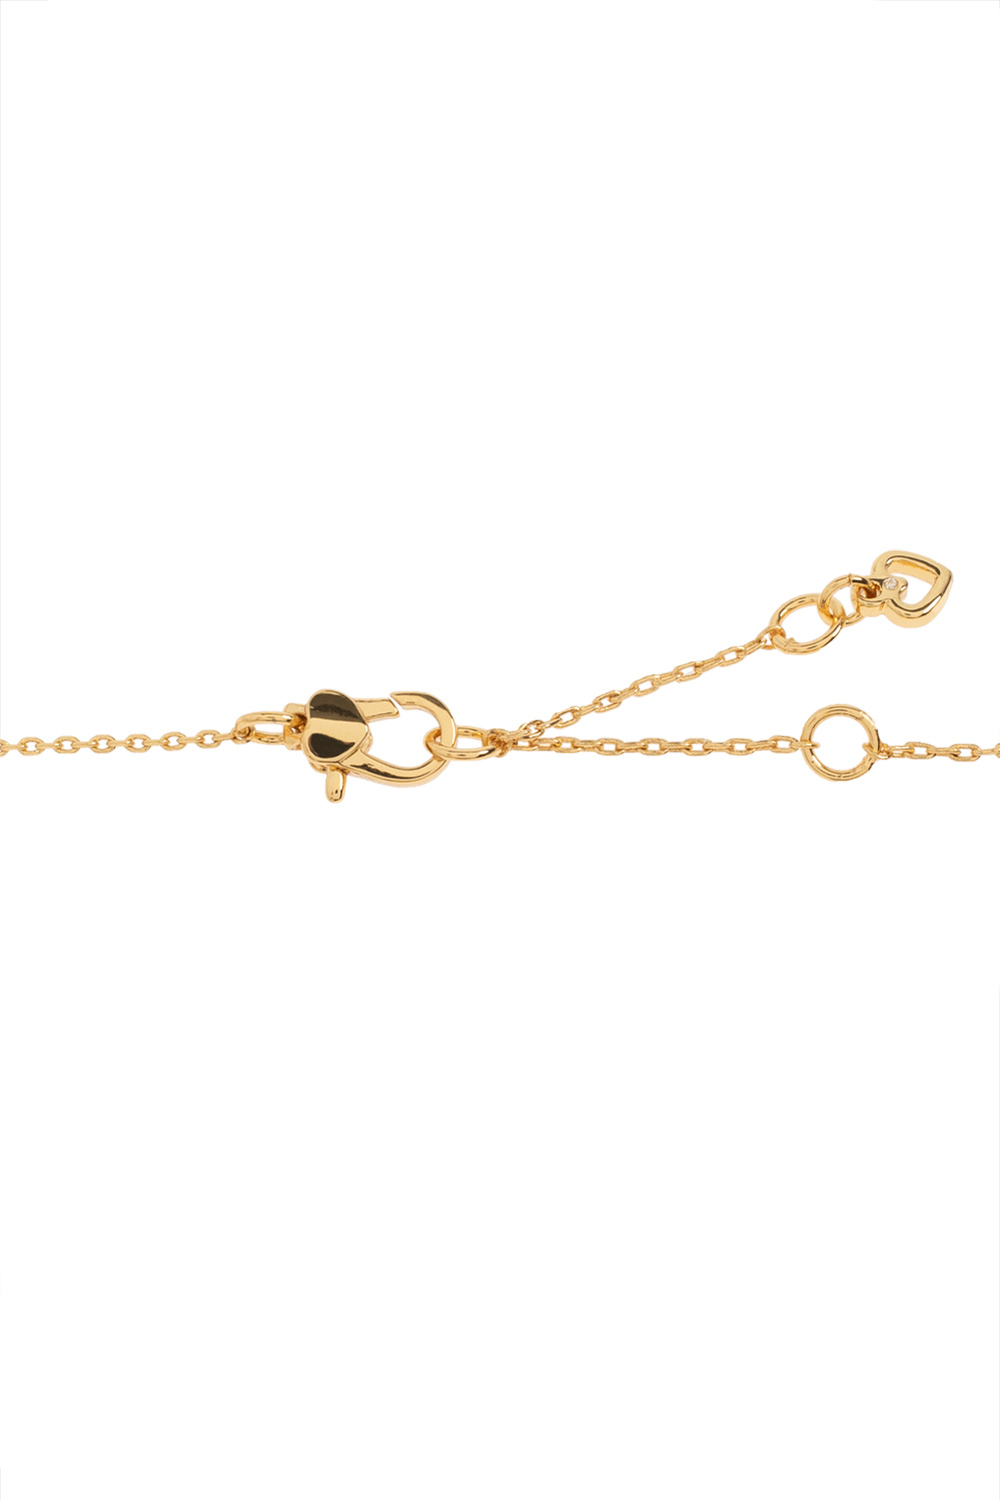 Kate Spade Charm necklace